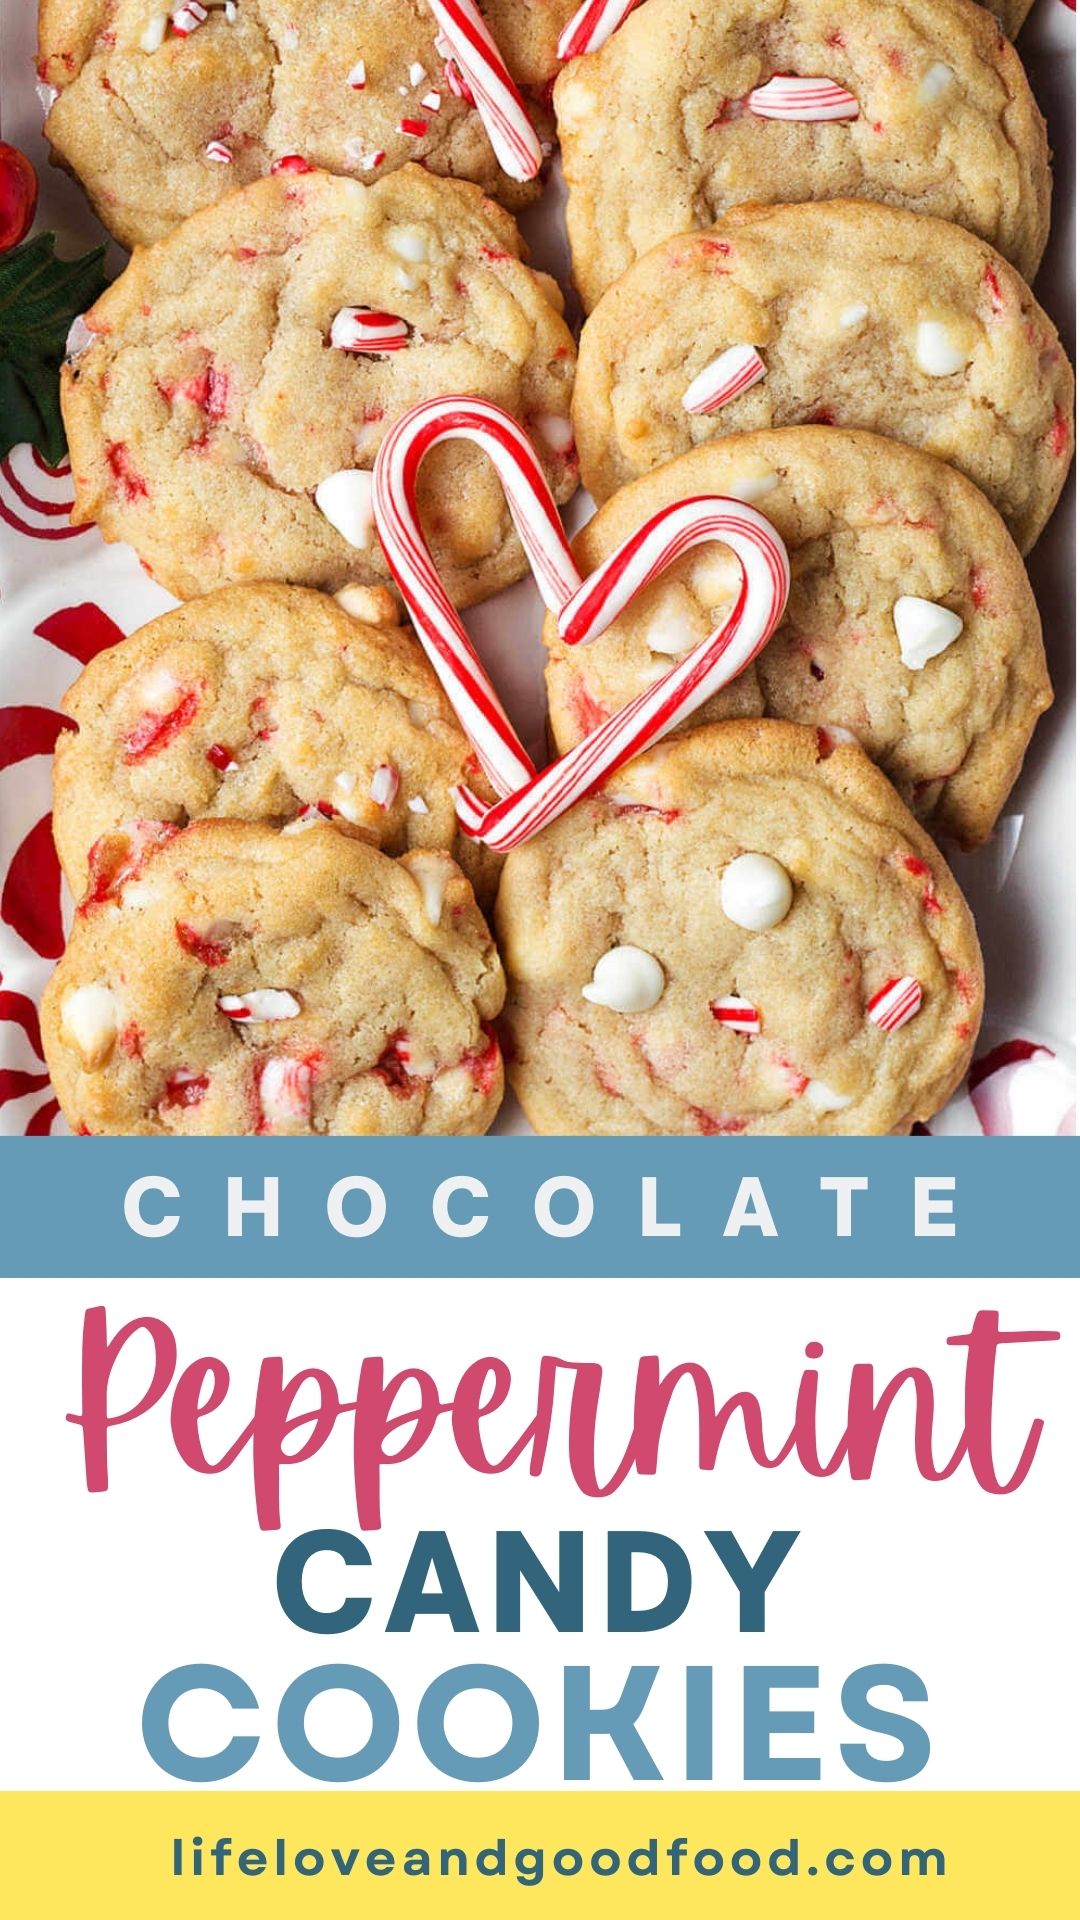 White Chocolate Chip Peppermint Candy Cookies - Life, Love, and Good Food